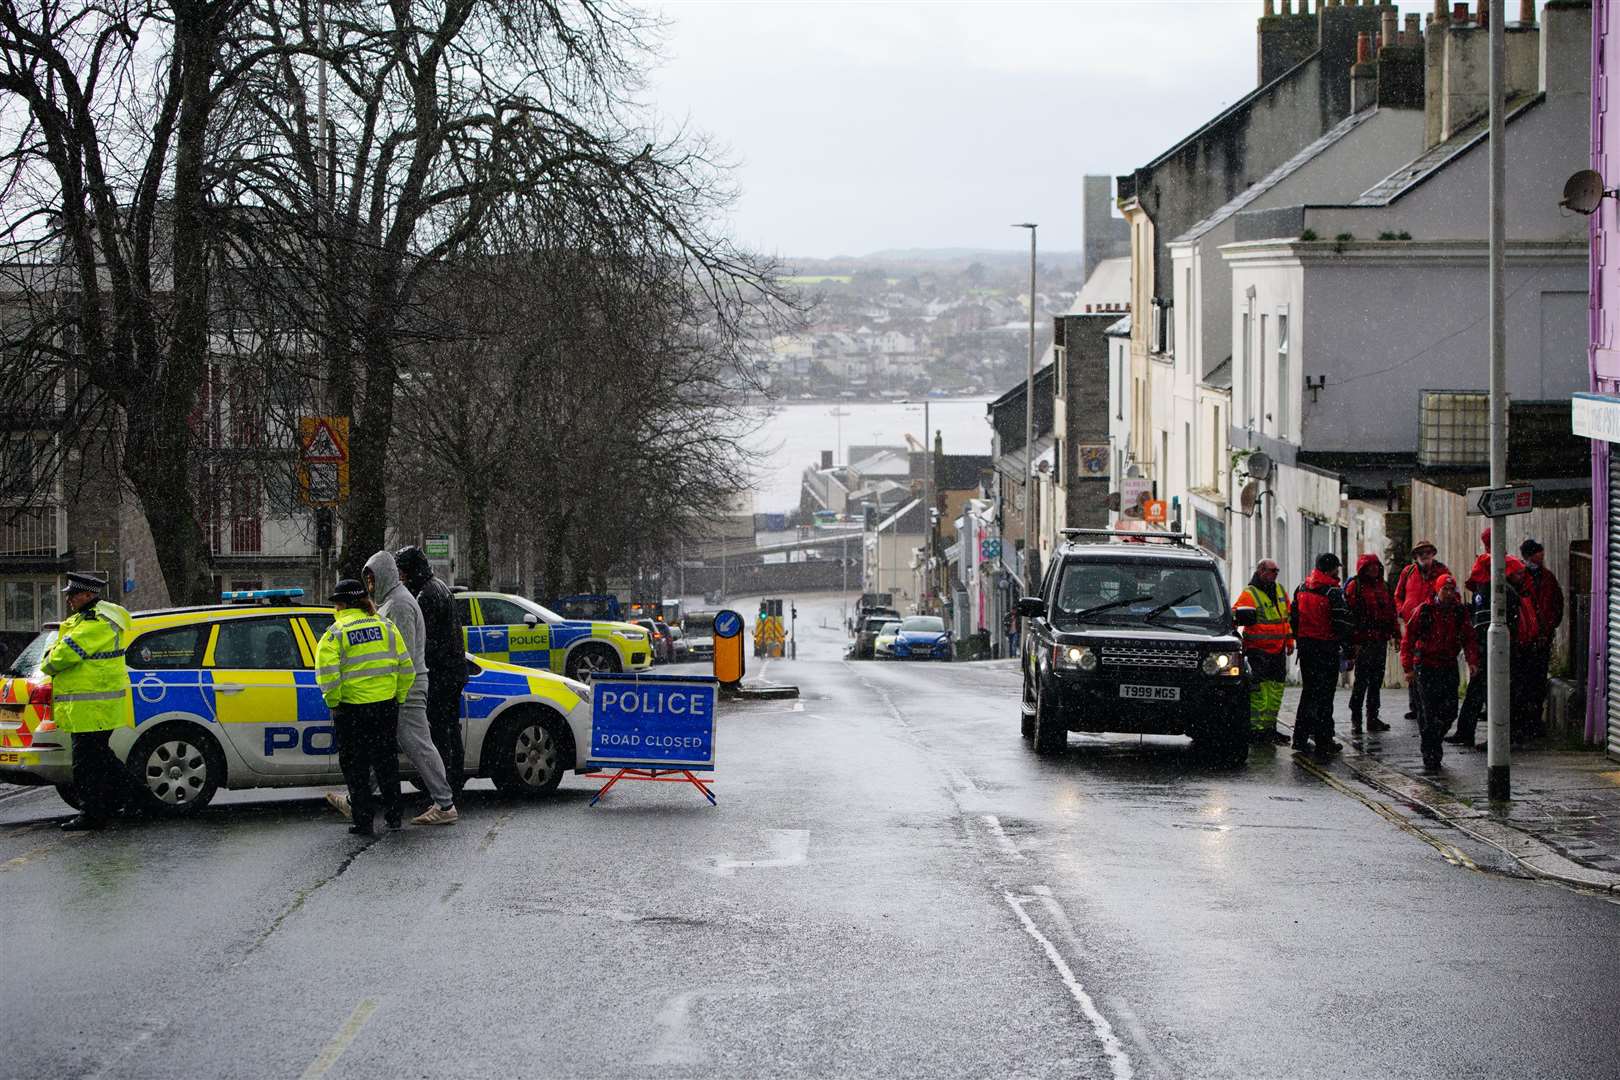 Emergency workers gather near the Torpoint Ferry crossing in Plymouth where a suspected Second World War explosive device will be taken to be disposed of at sea (Ben Birchall/PA)